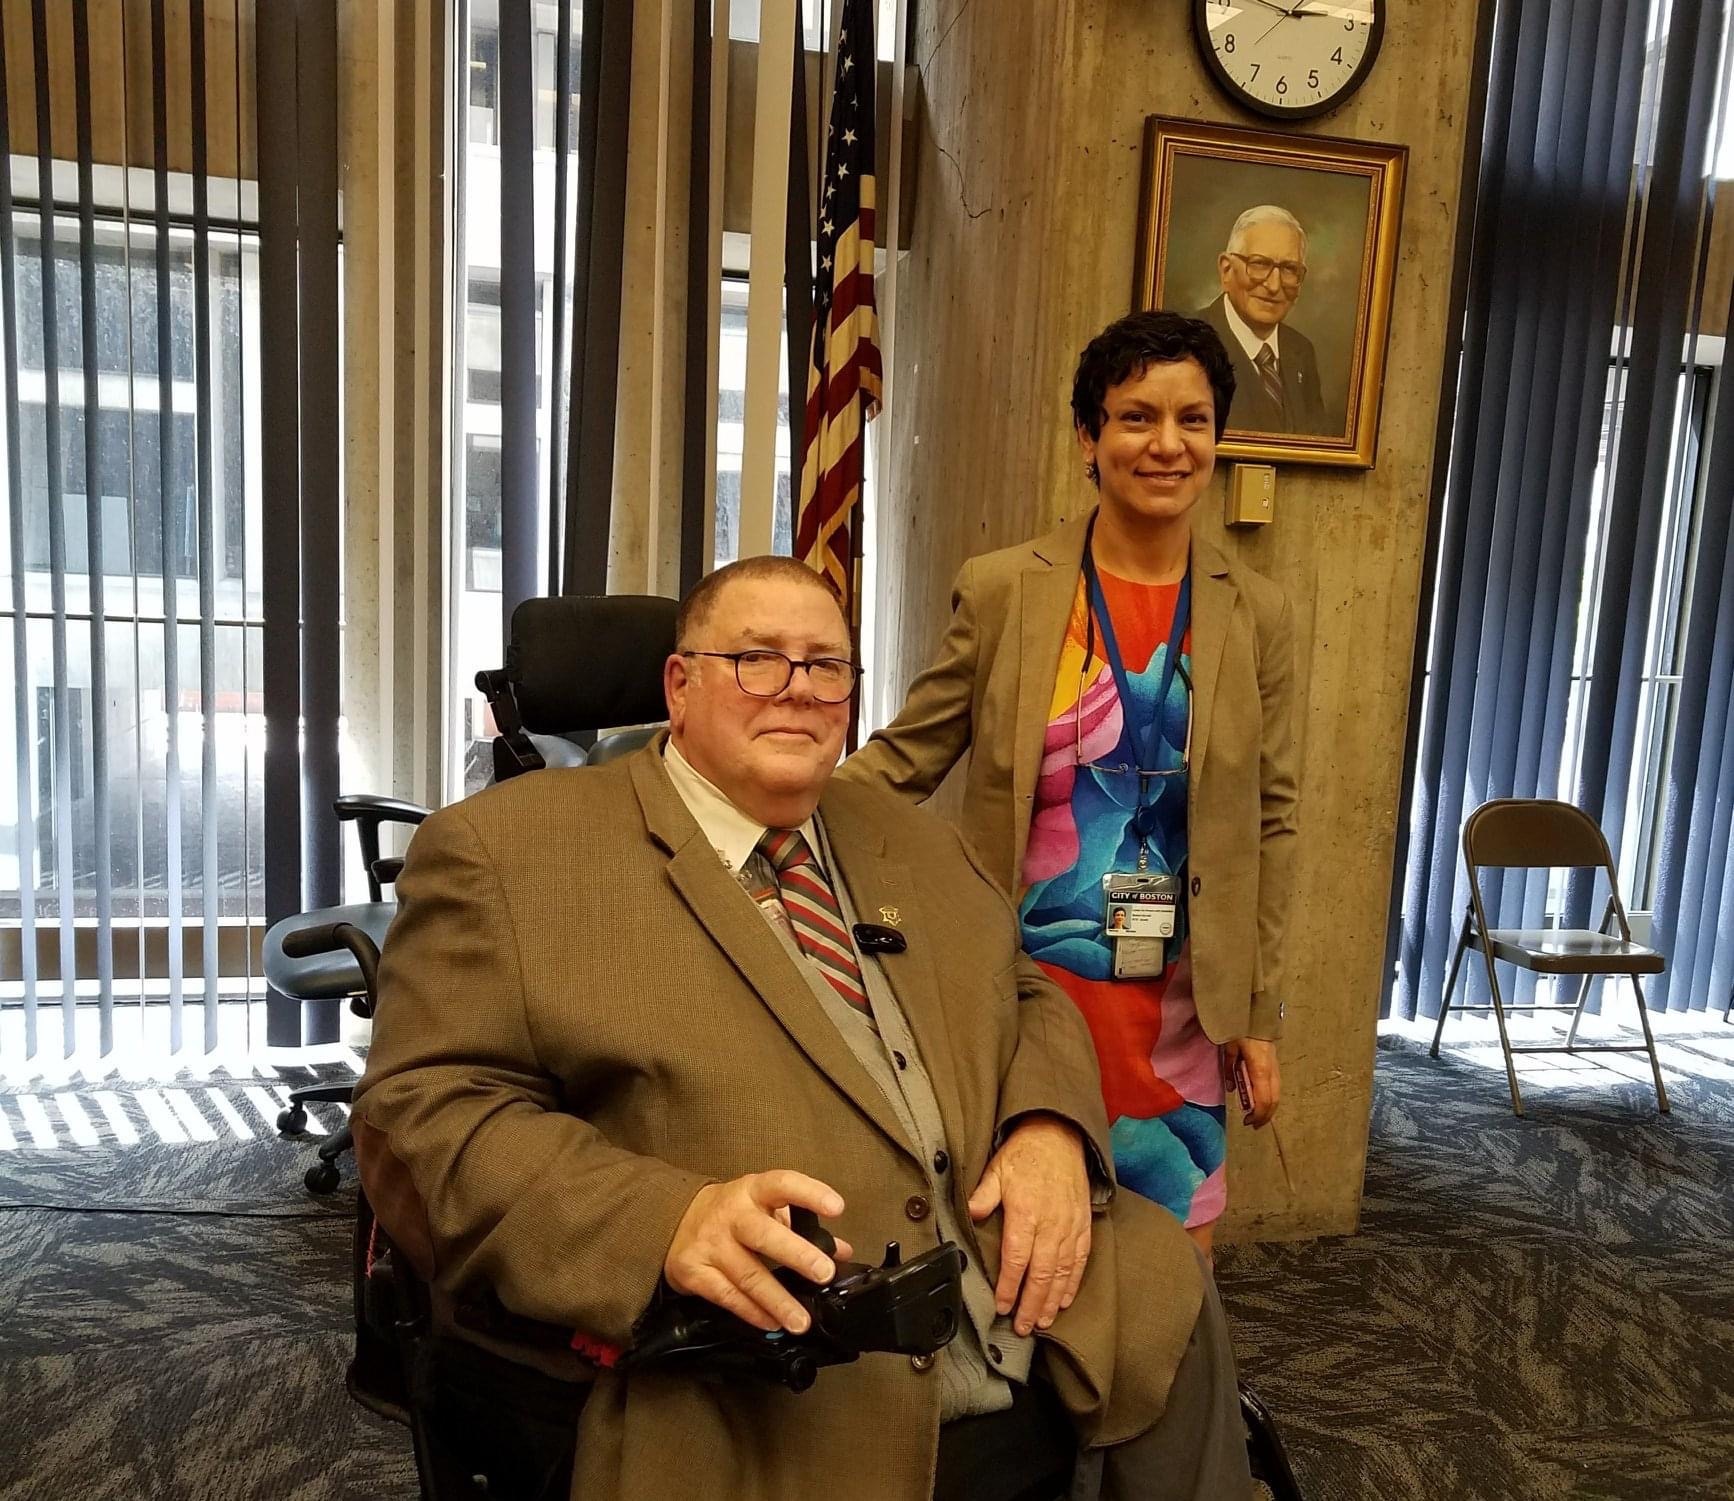 Tom, wearing a beige suit, poses next to Patricia Mendez. They are in an office with the American flag behind them and a portrait hanging on the wall.